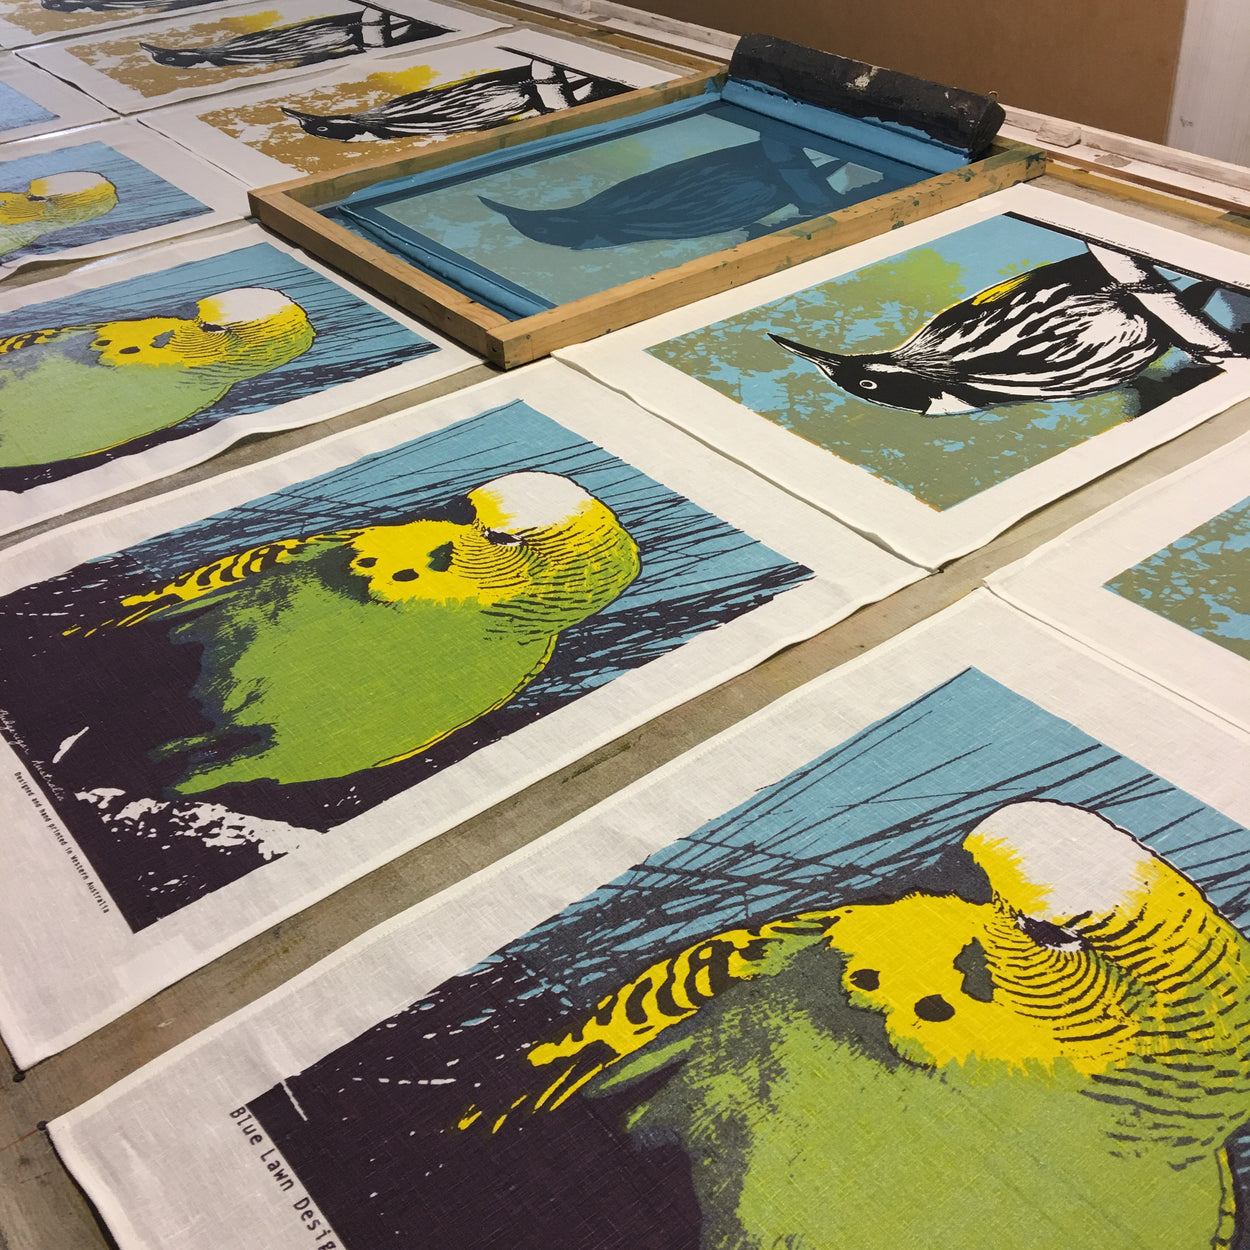 Photograph of native birds tea towels being printed.